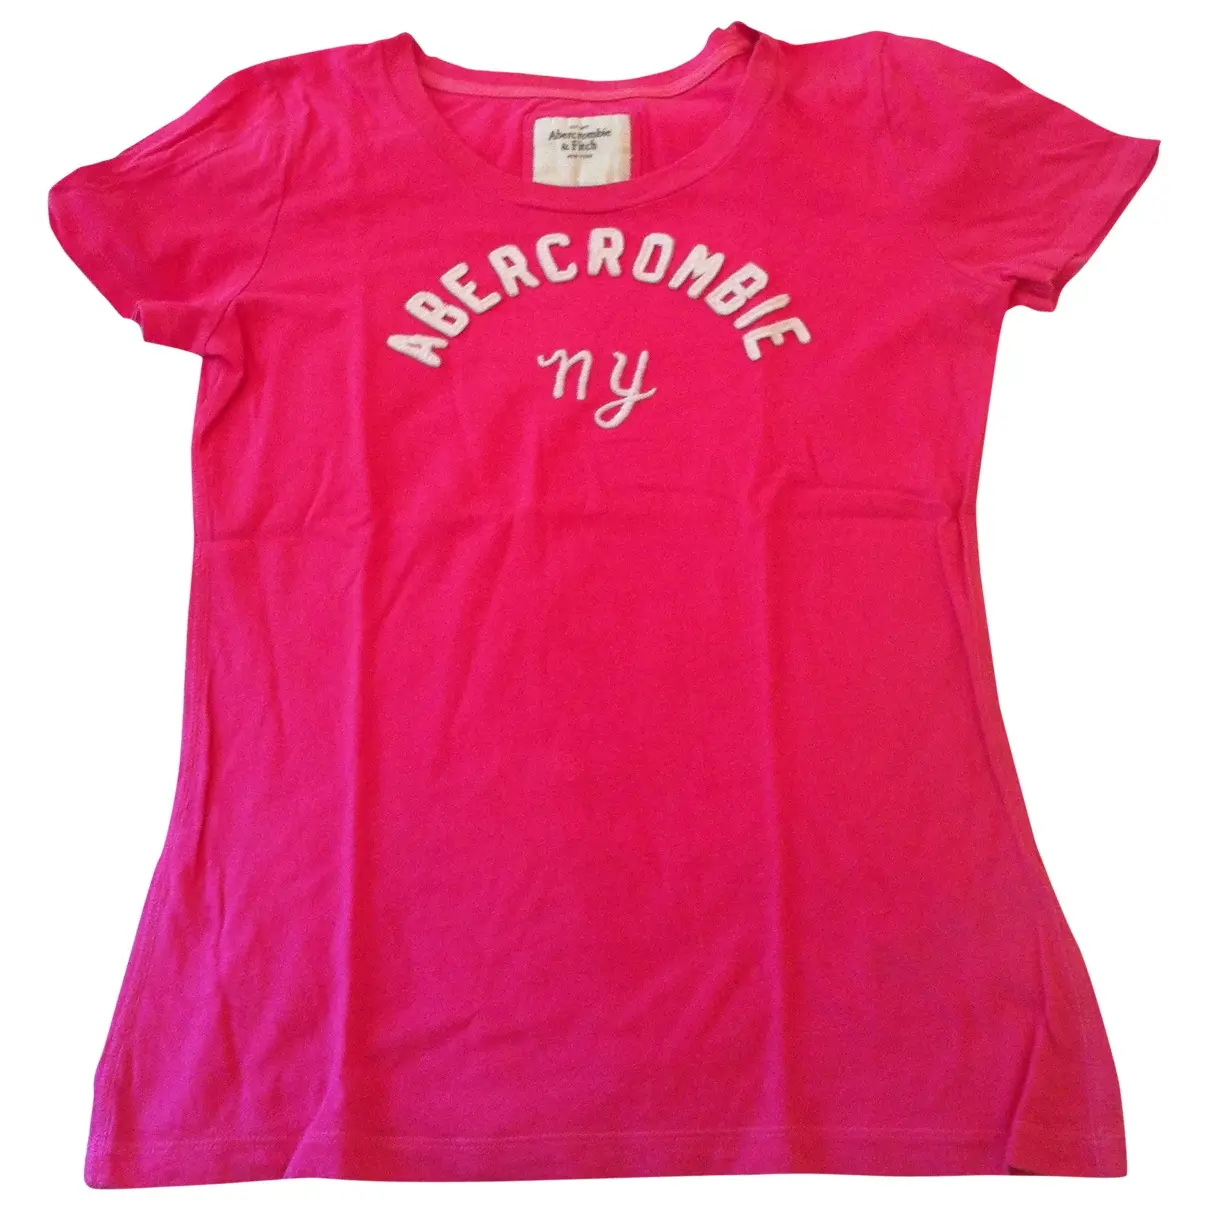 T-SHIRT Abercrombie & Fitch